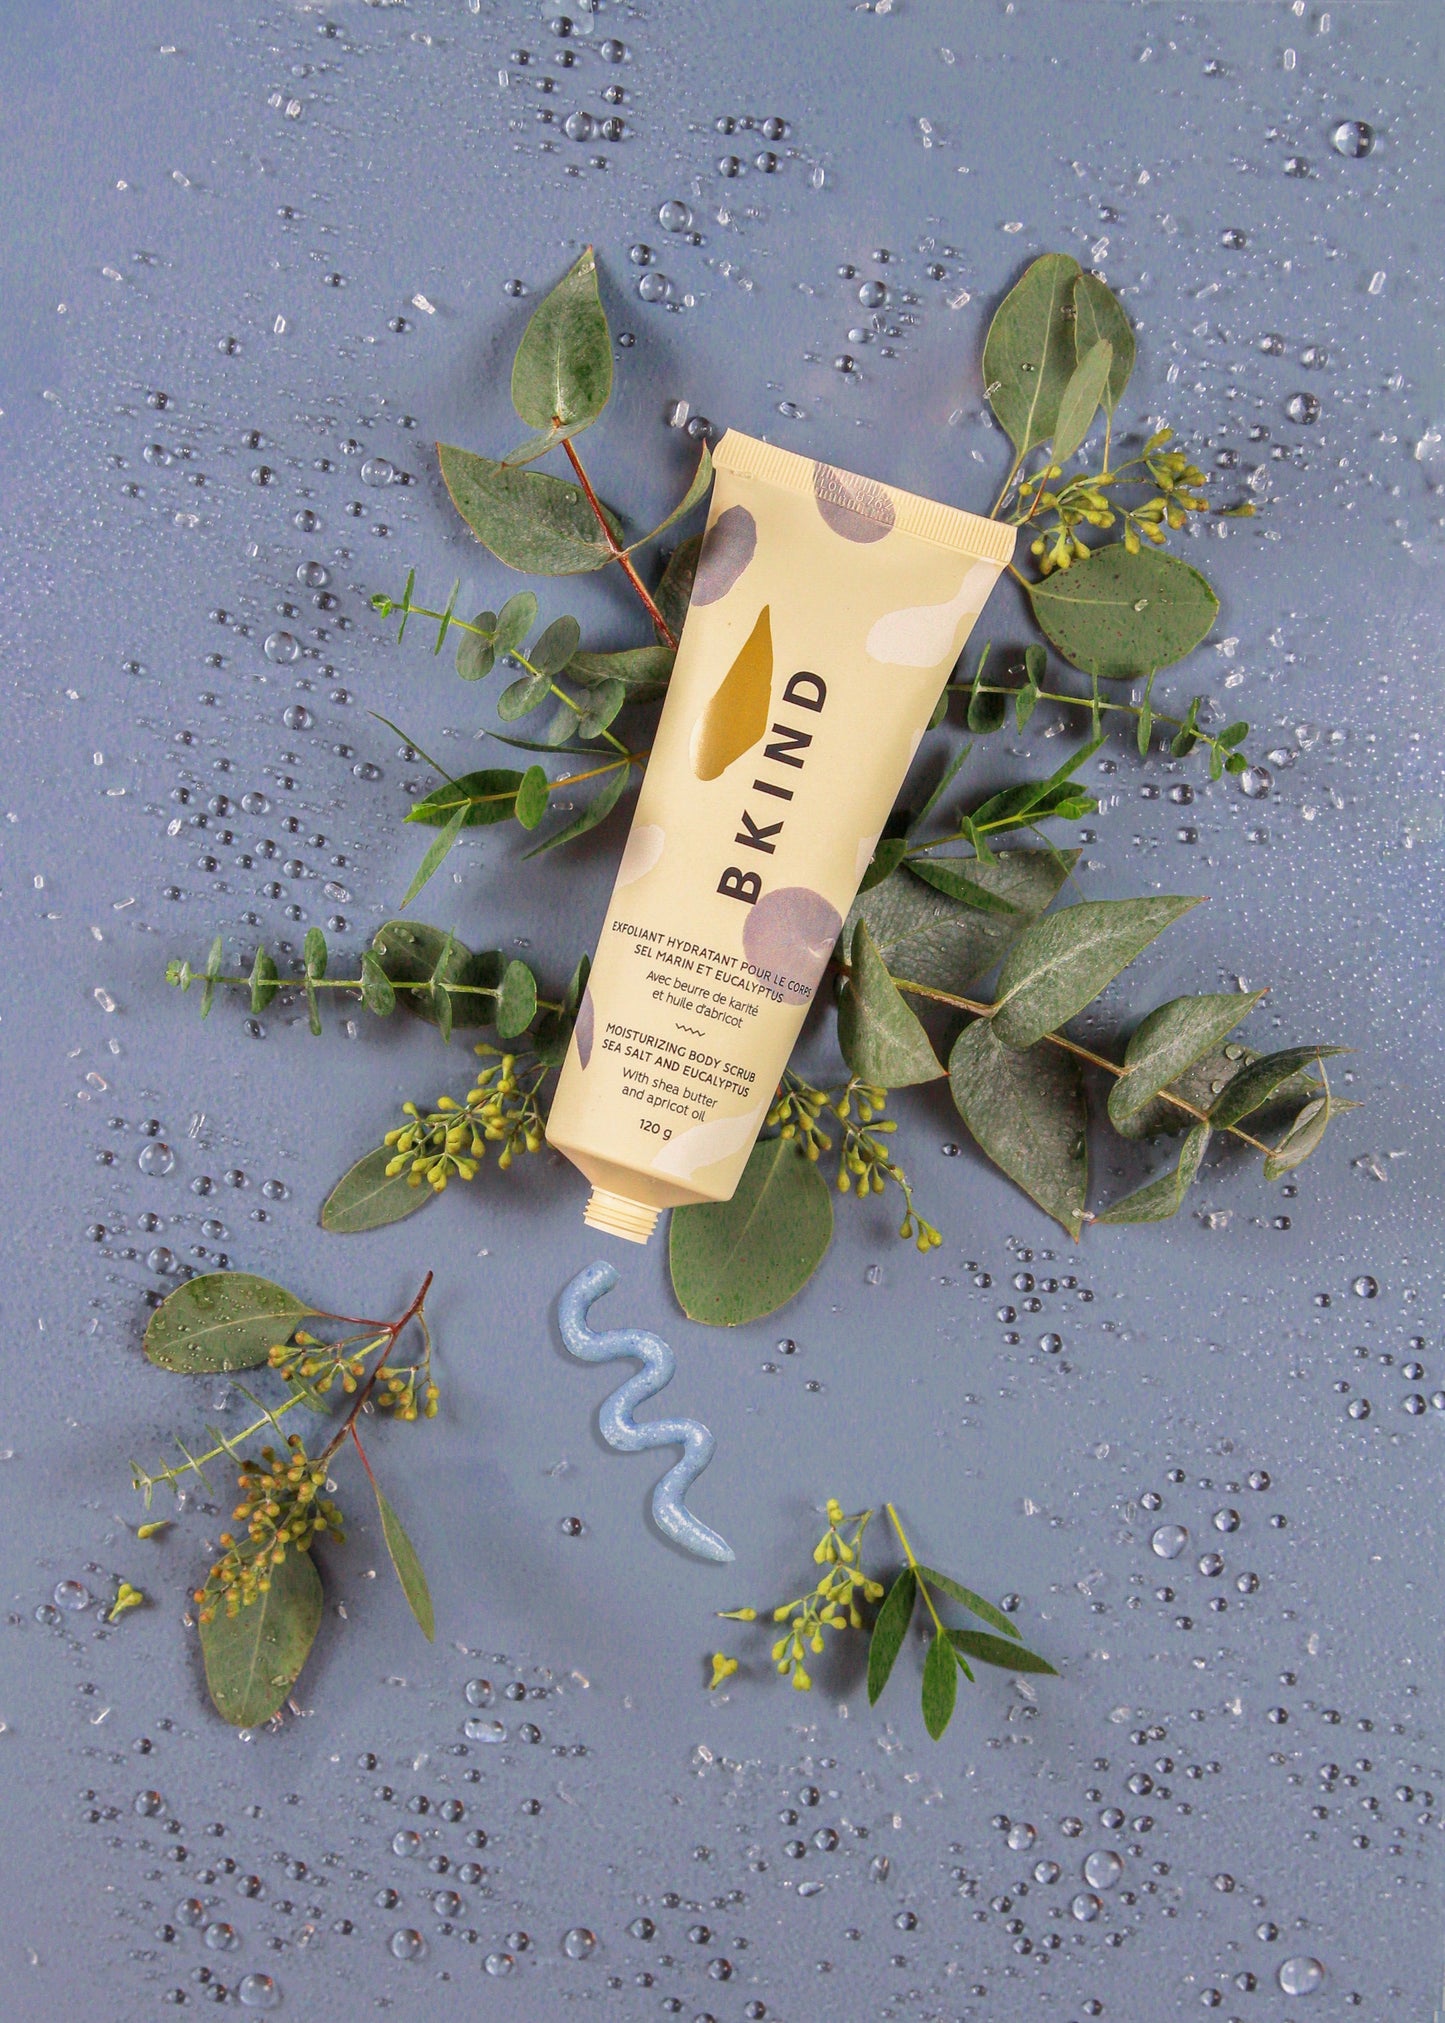 BKIND sea salt and eucalyptus moisturizing scrub in a beige tube with powder blue designs on the tube -  displayed on a blue background lying over green eucalyptus leaves with a display of the scrub on the blue background.